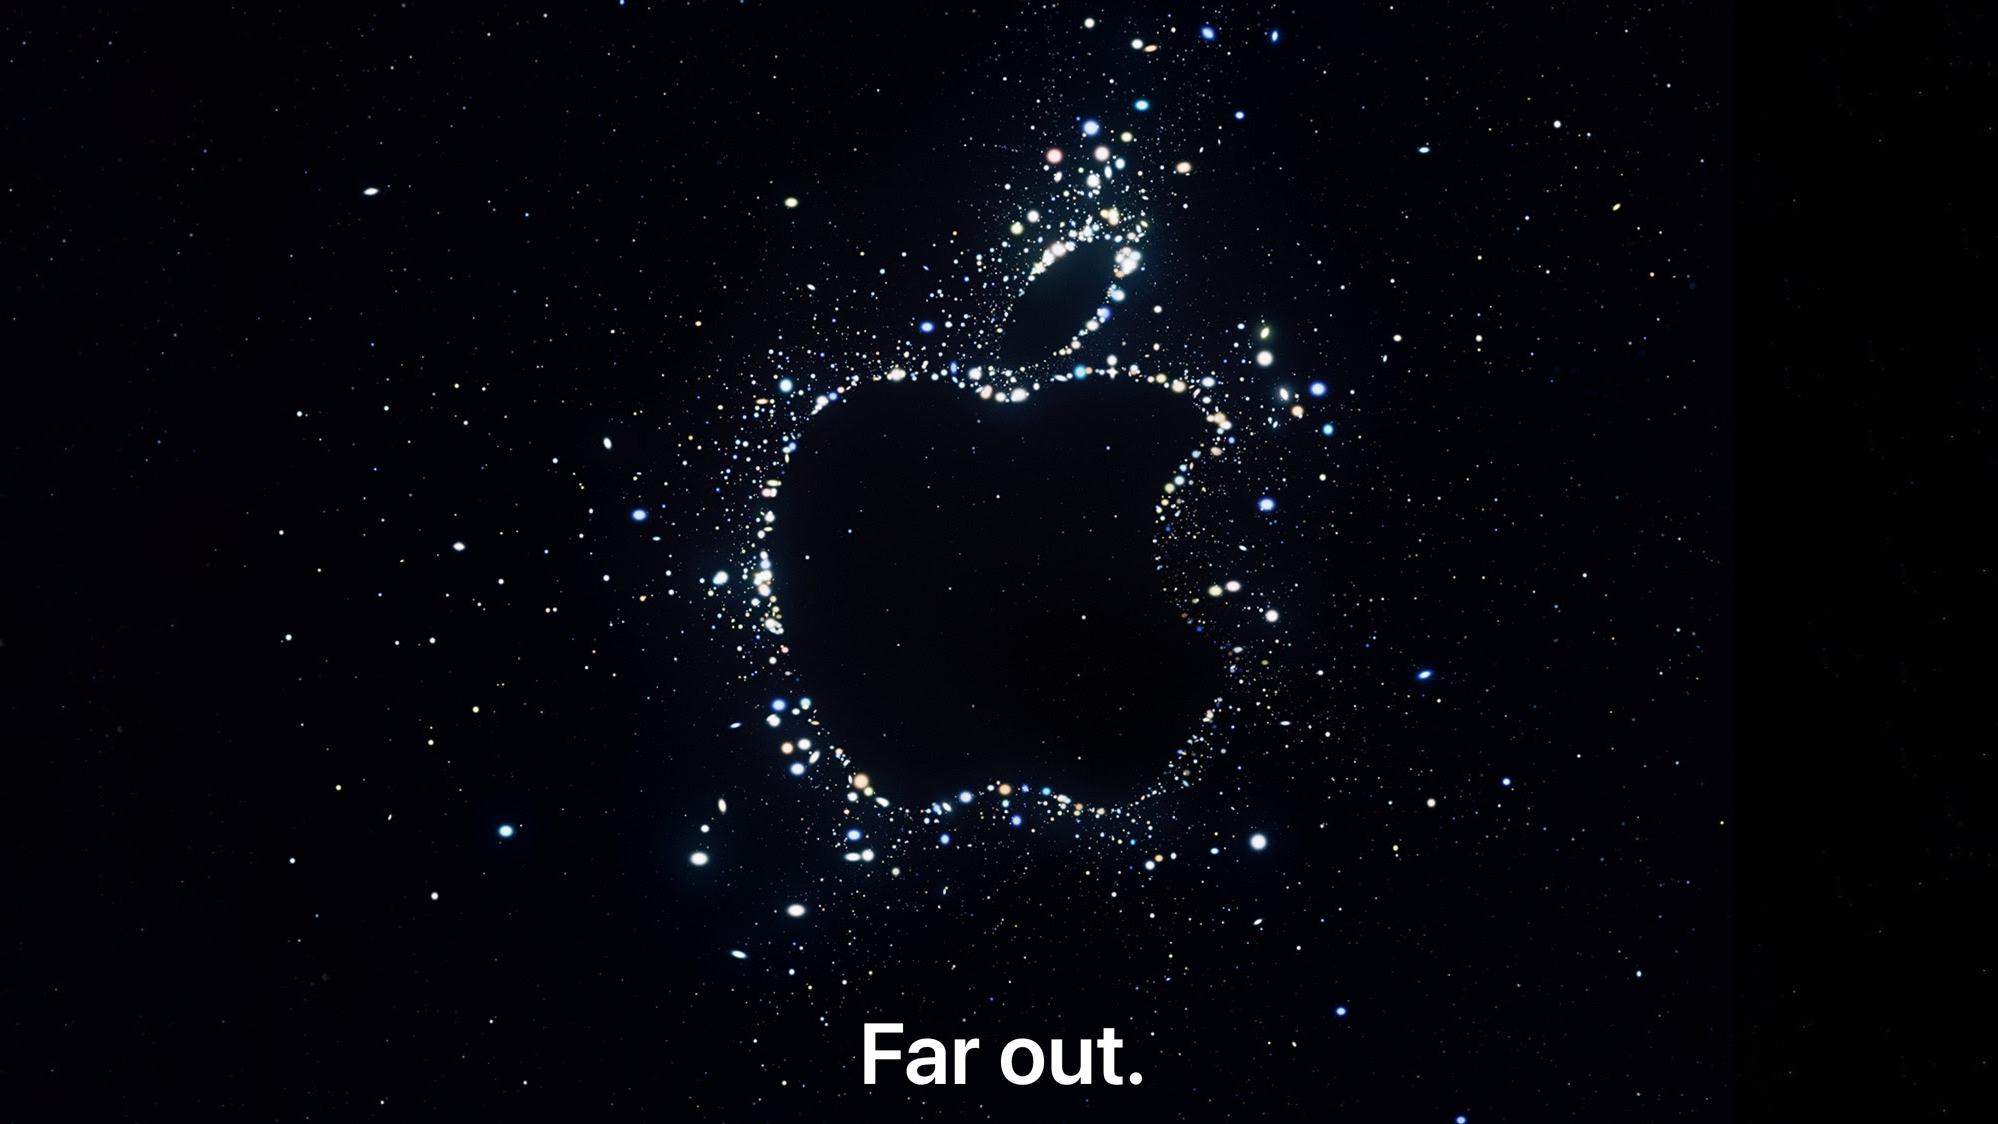 Apple Far Out event scheduled for Sept. 7